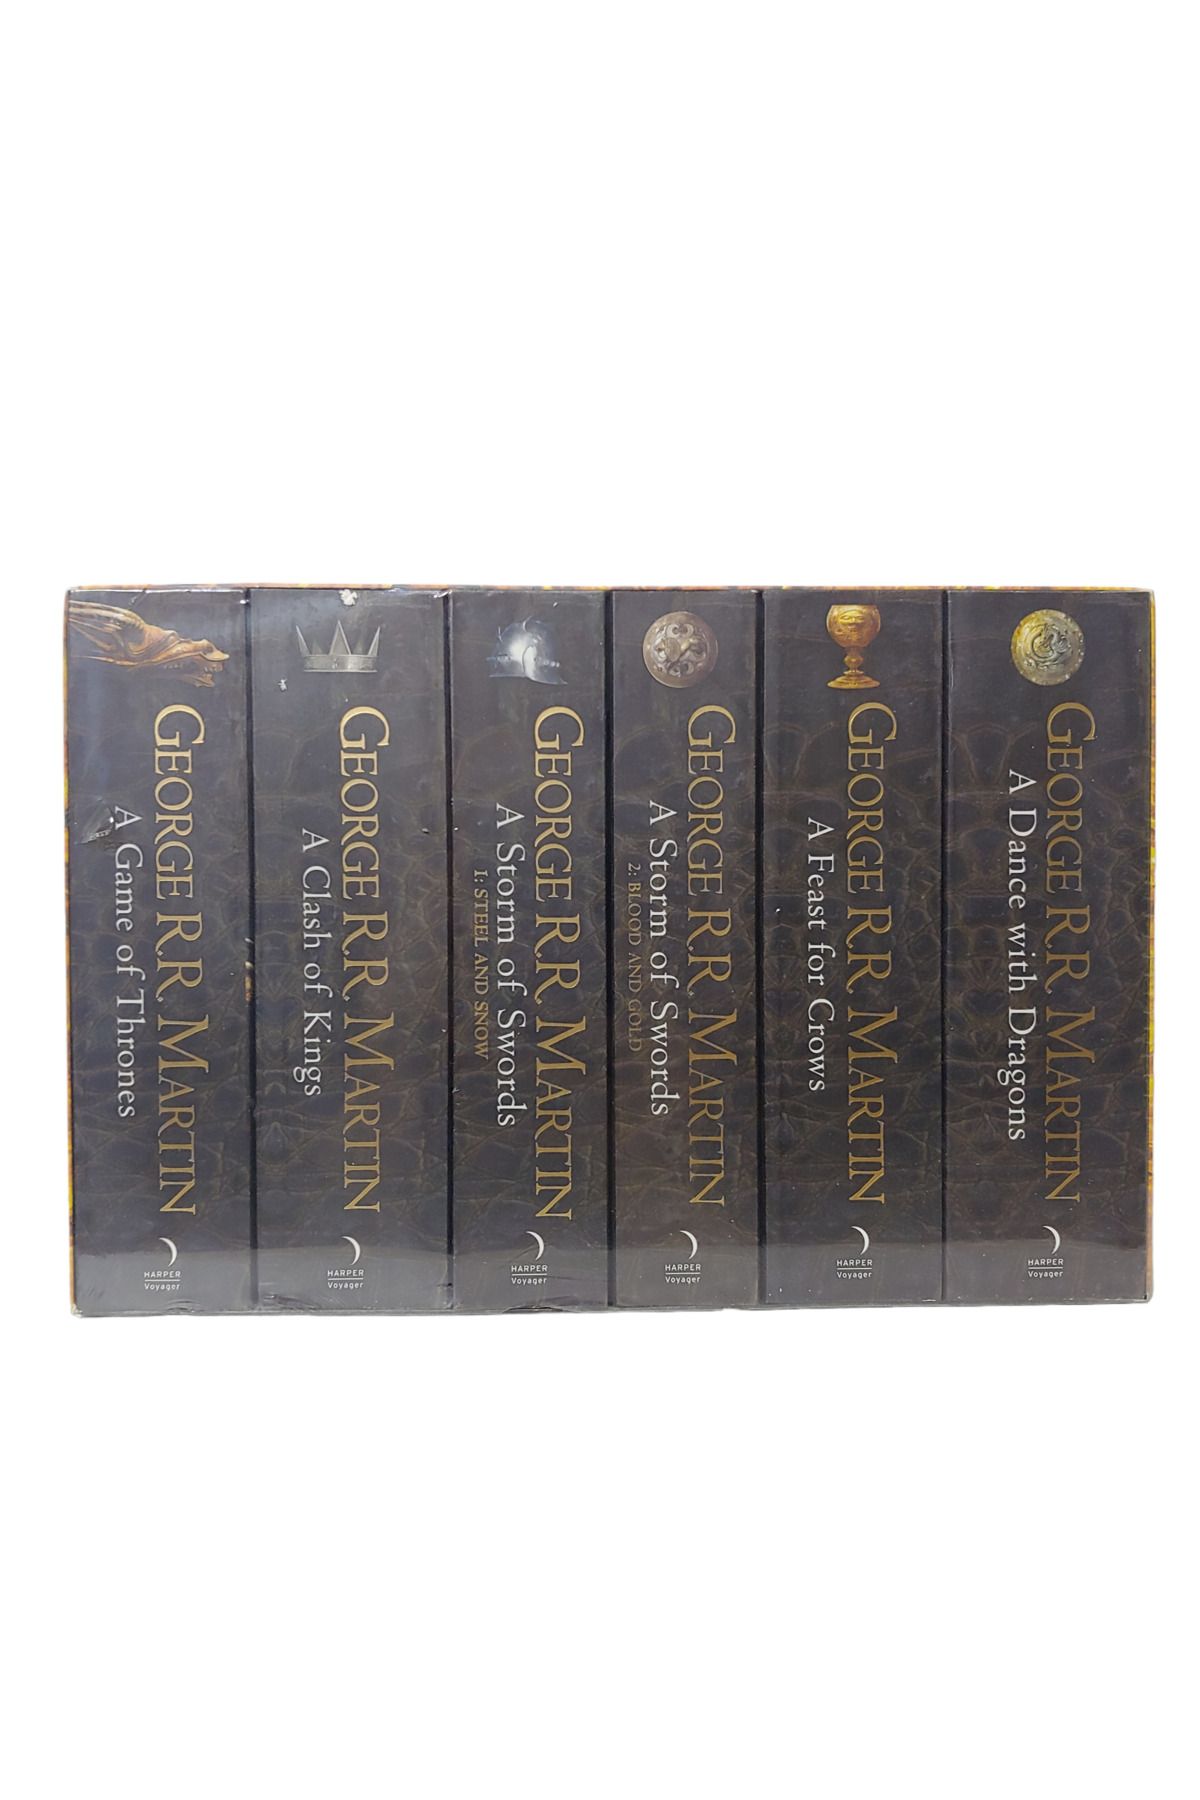 Harper Collins Game of Thrones The Complete Box Set of All 6 Books